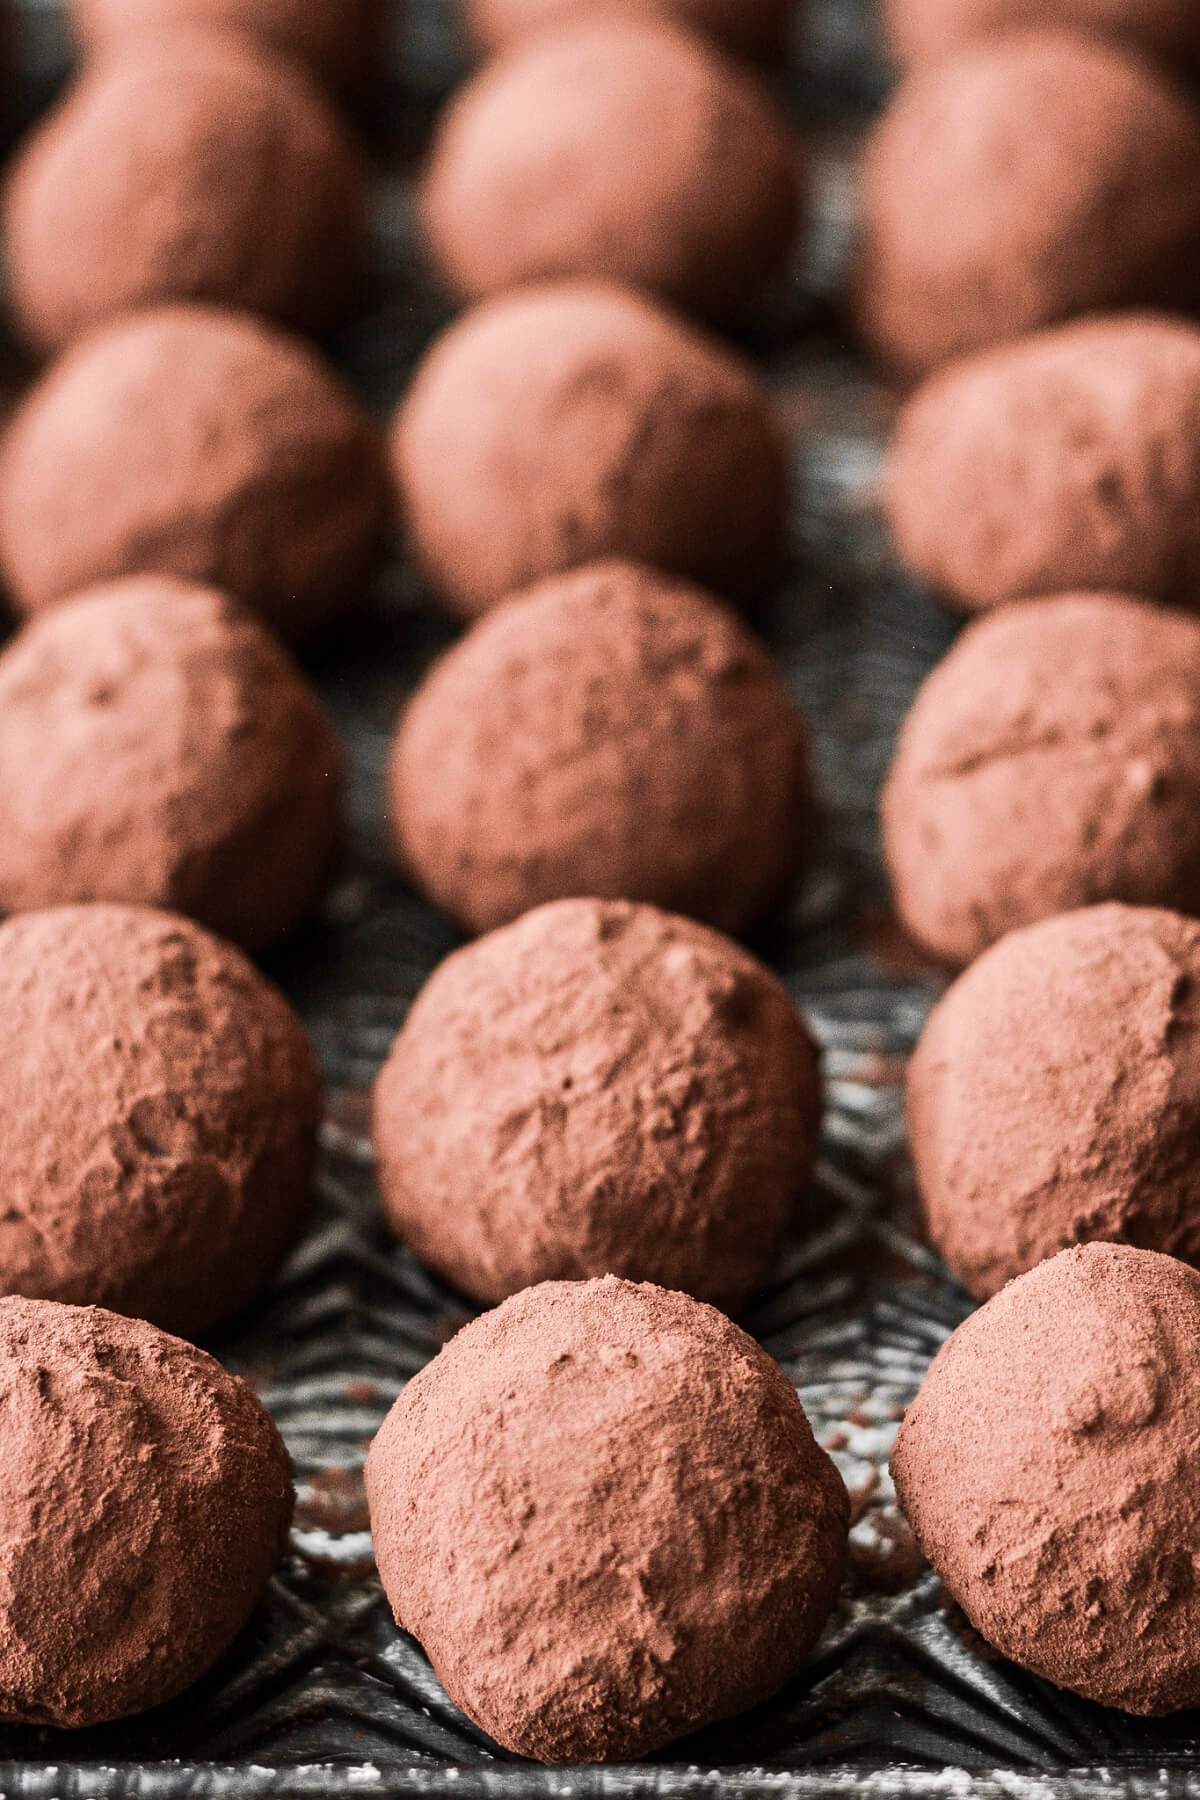 Chocolate truffles covered in cocoa powder on a baking sheet.